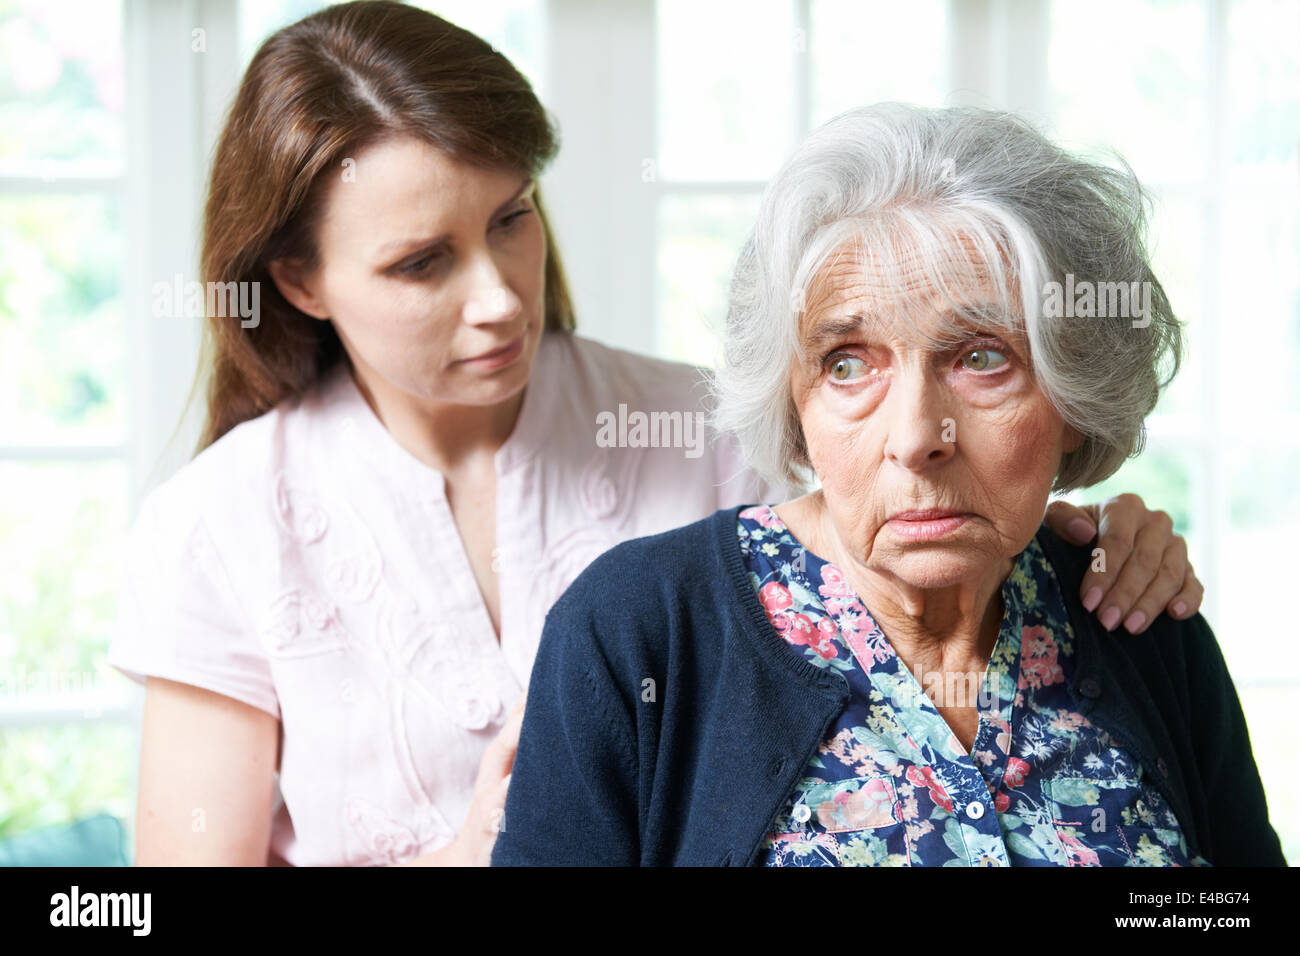 Adult Daughter Consoling Senior Mother At Home Stock Photo